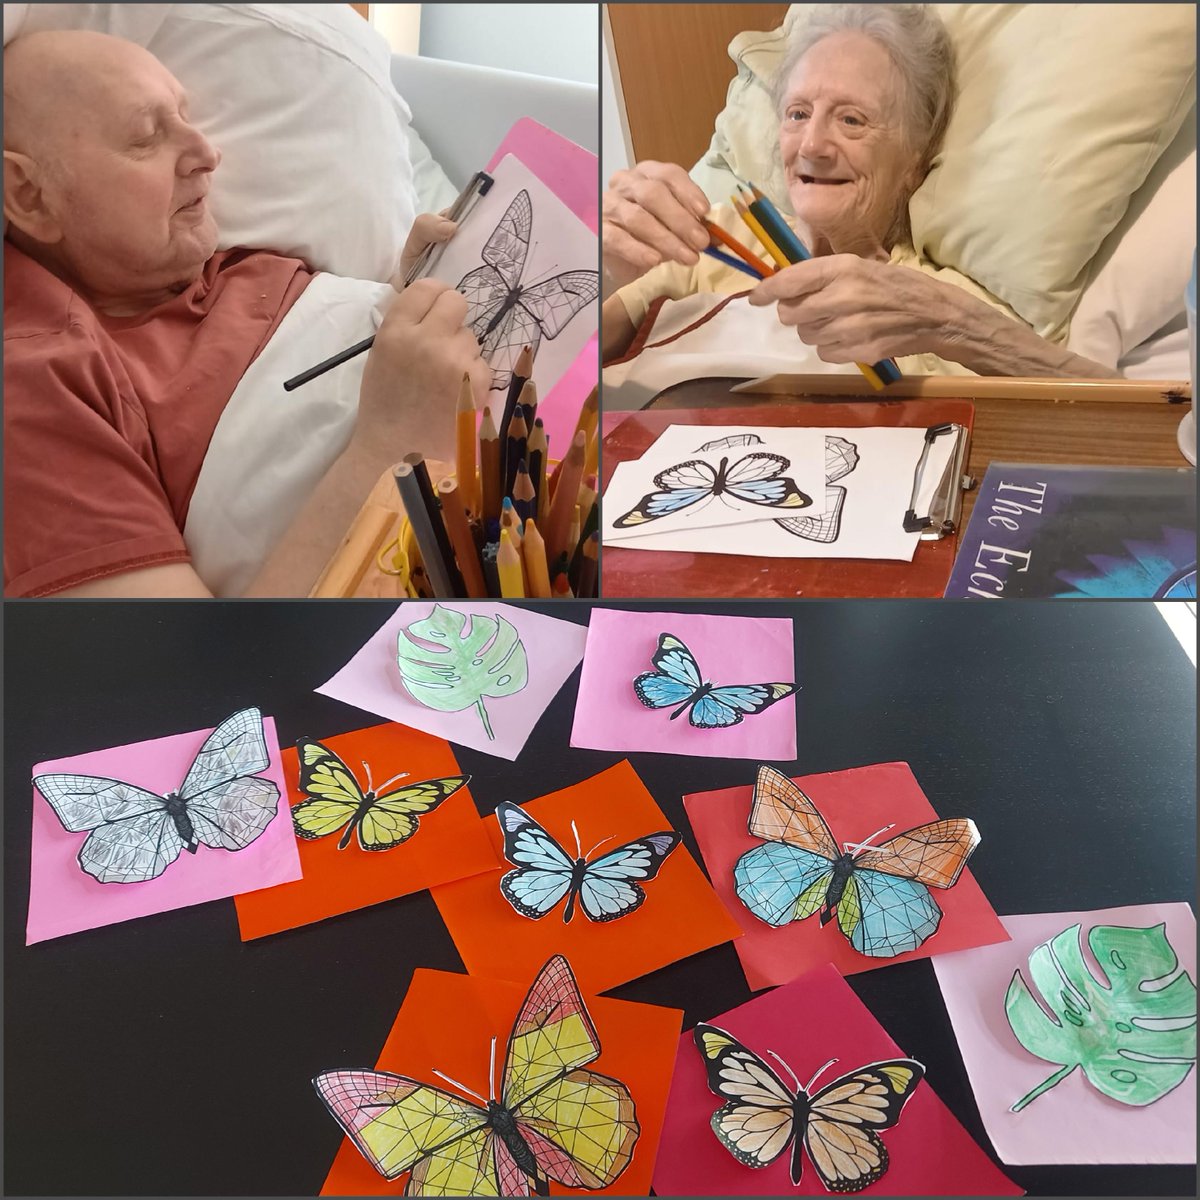 Spread your wings and let your creativity take flight! Our bed-bound residents had a blast adding vibrant shades to these beautiful butterflies and creating their own colourful cards.
#NursingHome #AccessibleArt #ButterflyBlissArt #InspiringCreativity